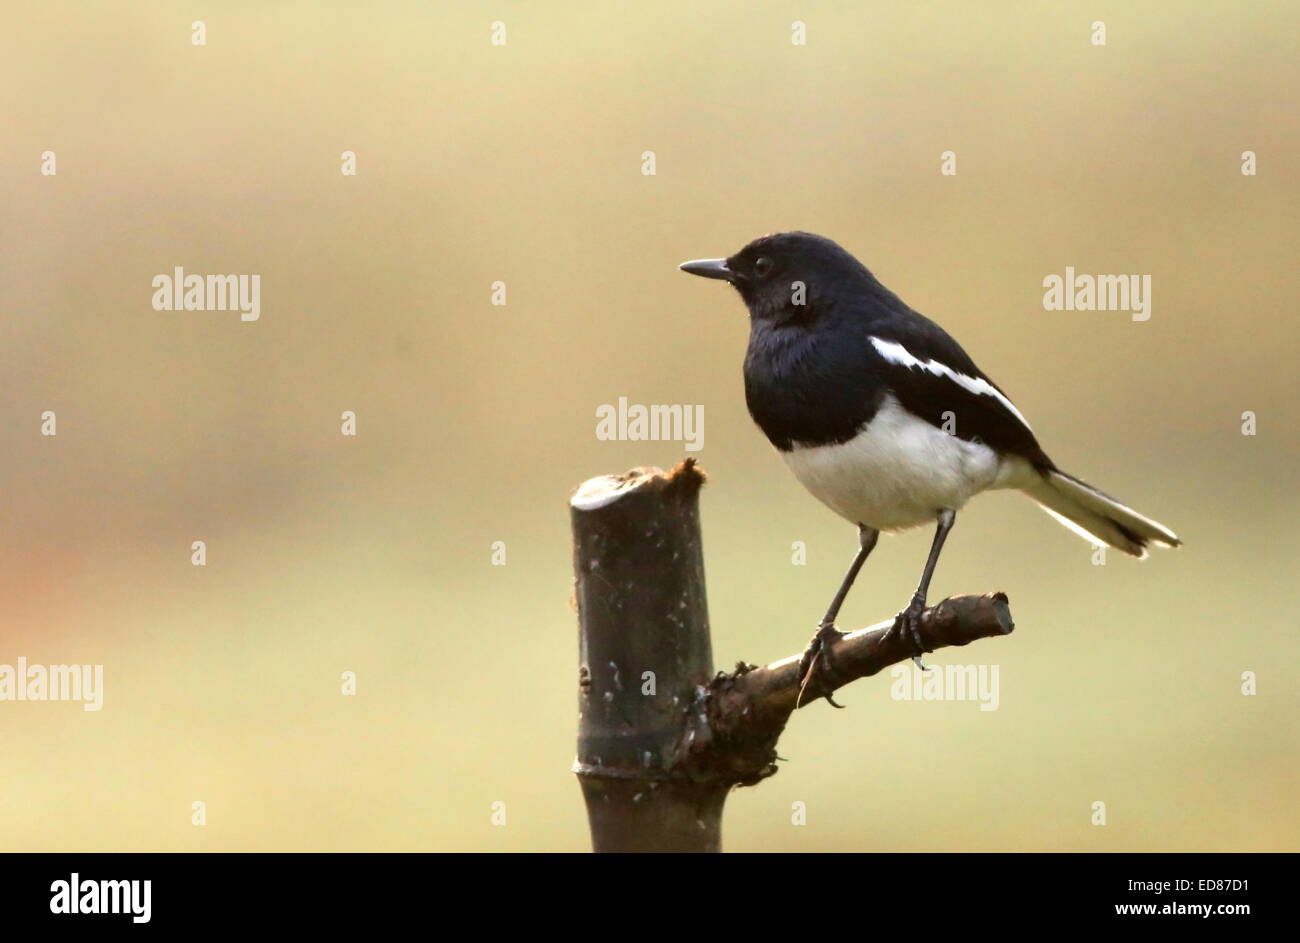 Single Magpie robin standing outdoor Stock Photo